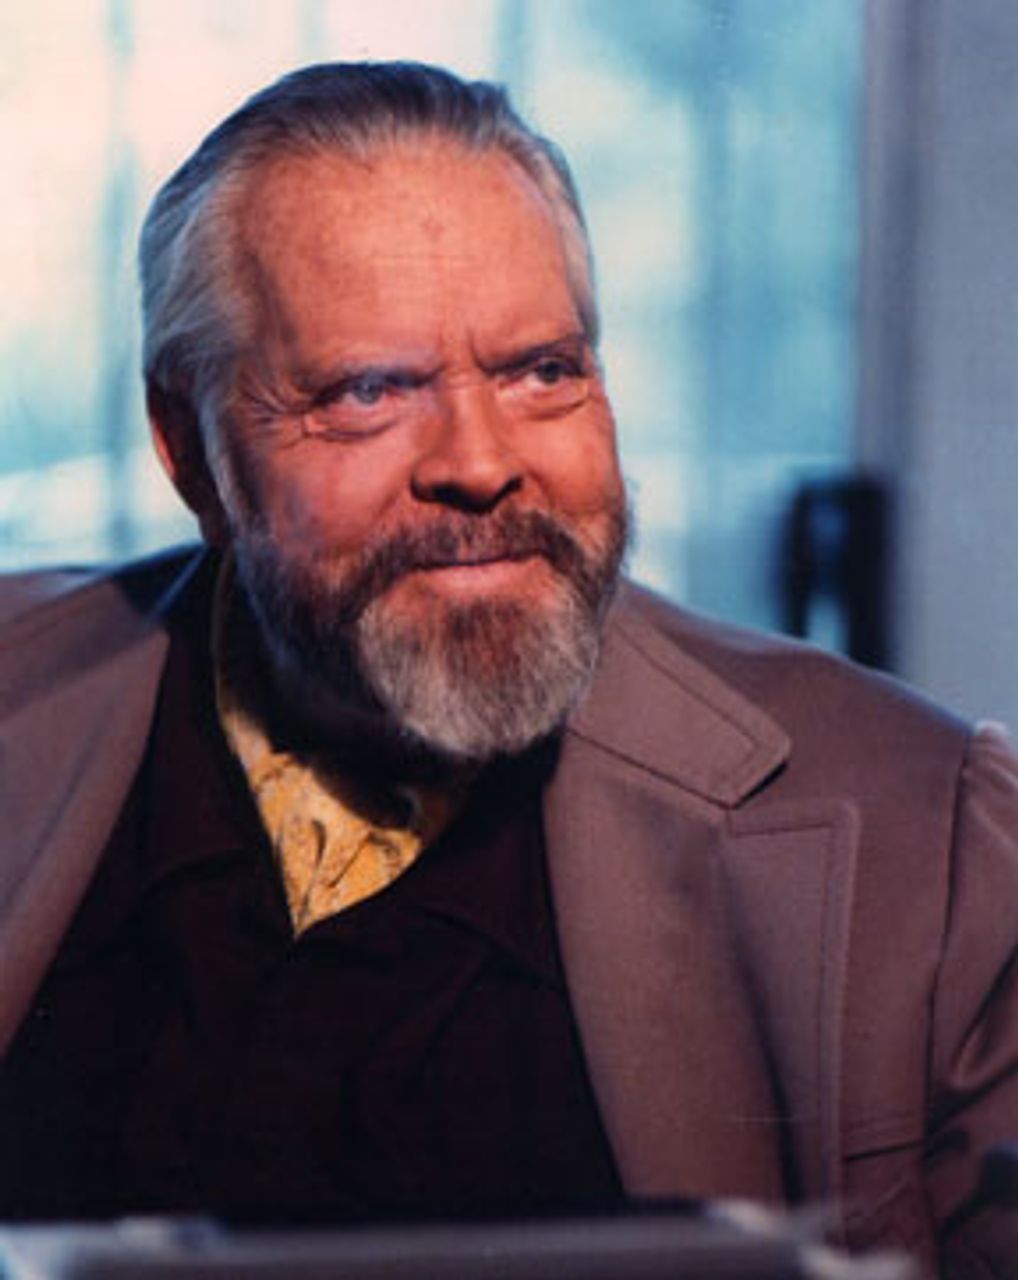 Orson Welles in the 1980s (photo: Gary Graver)